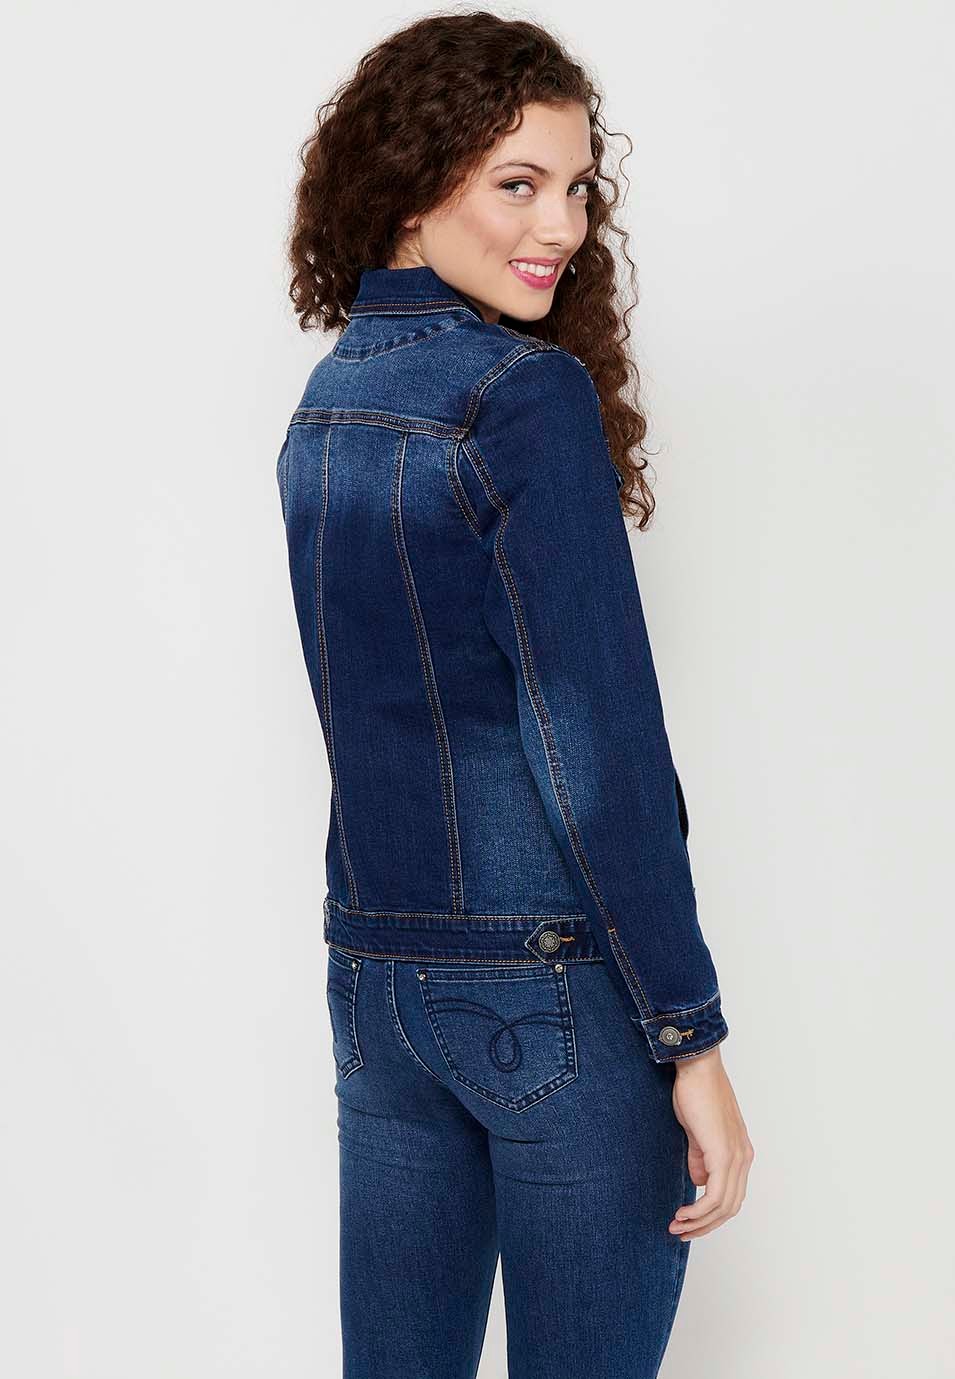 Dark Blue Long Sleeve Denim Jacket with Button Front Closure and Pockets with Embroidery on the Shoulders for Women 5